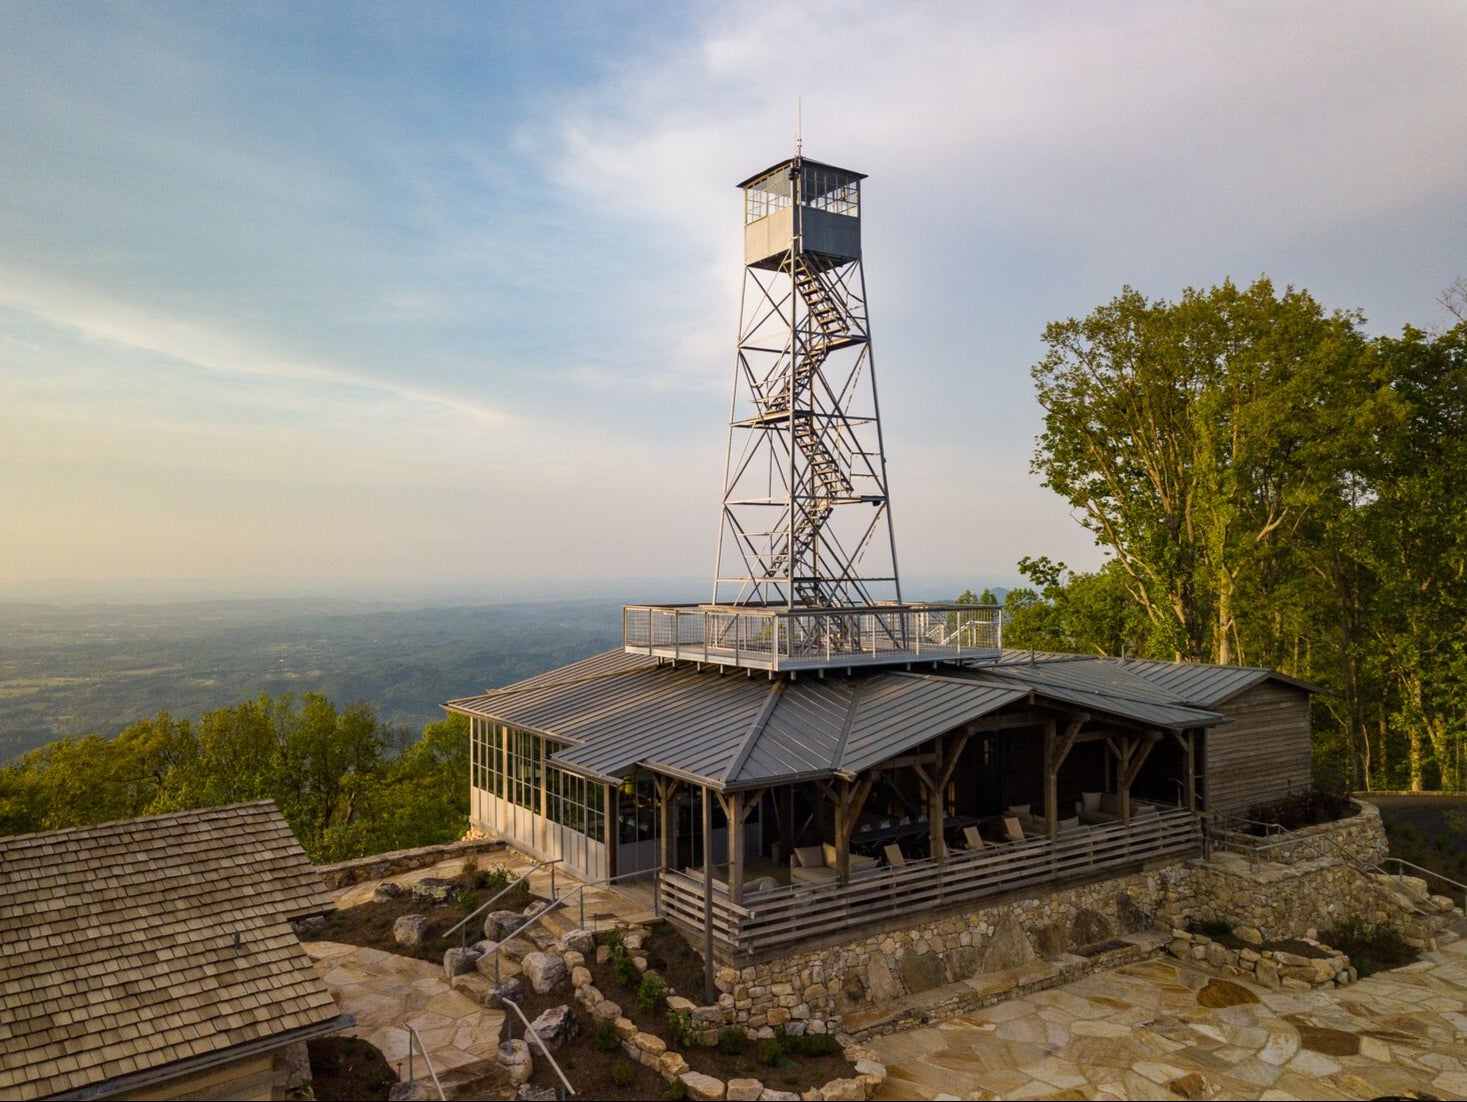 The exclusive Firetower restaurant is built around a 1950s observation tower